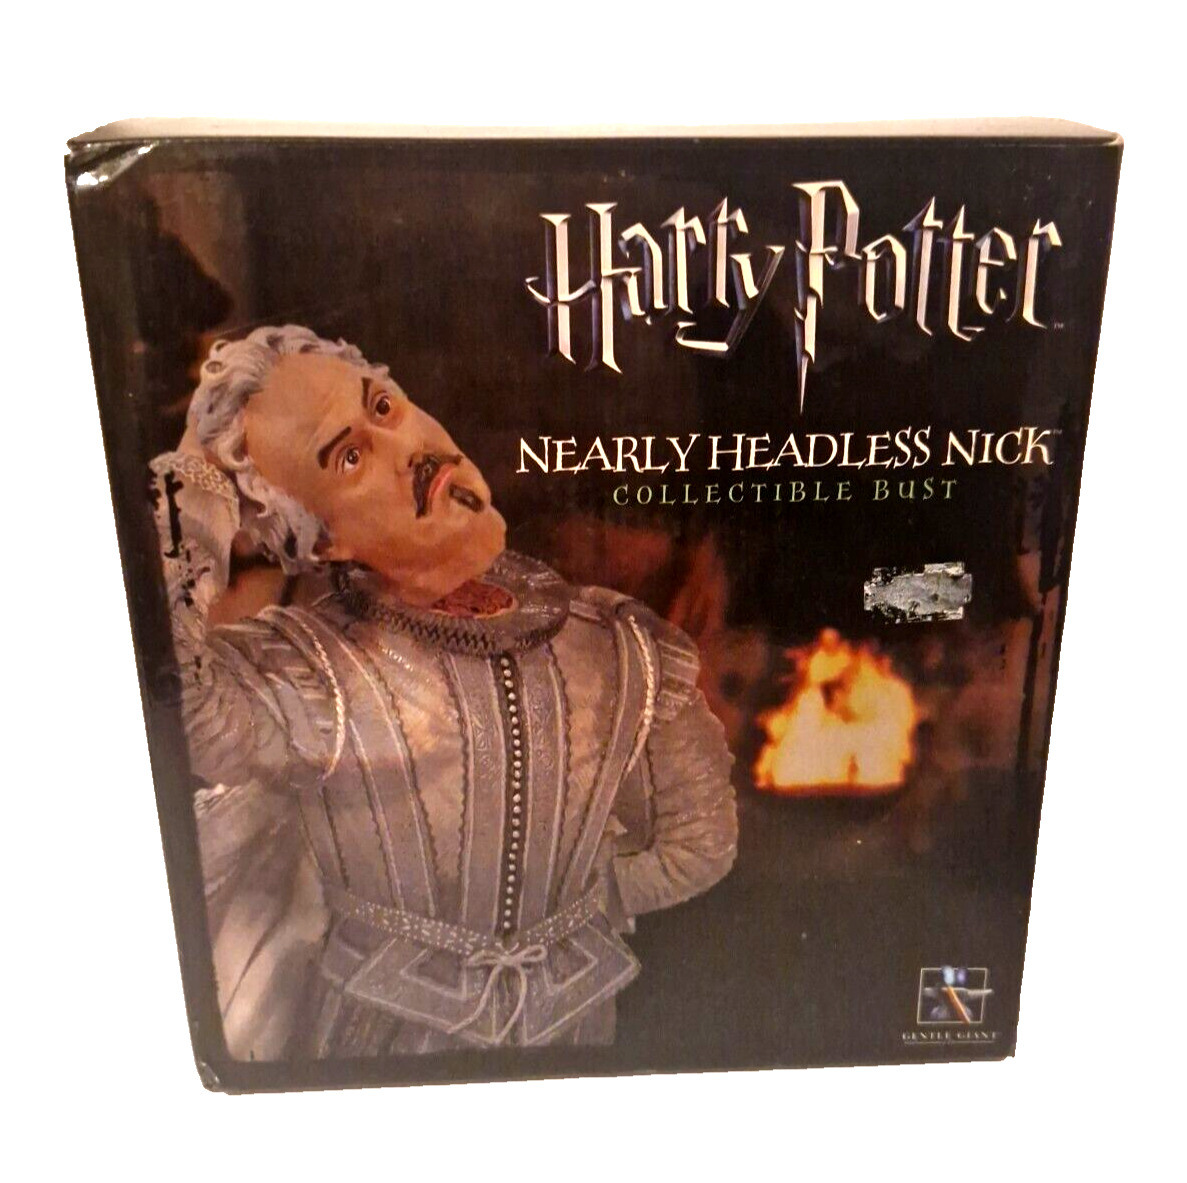 New Gentle Giant Nearly Headless Nick Collectible Bust LE 1500 Harry Potter